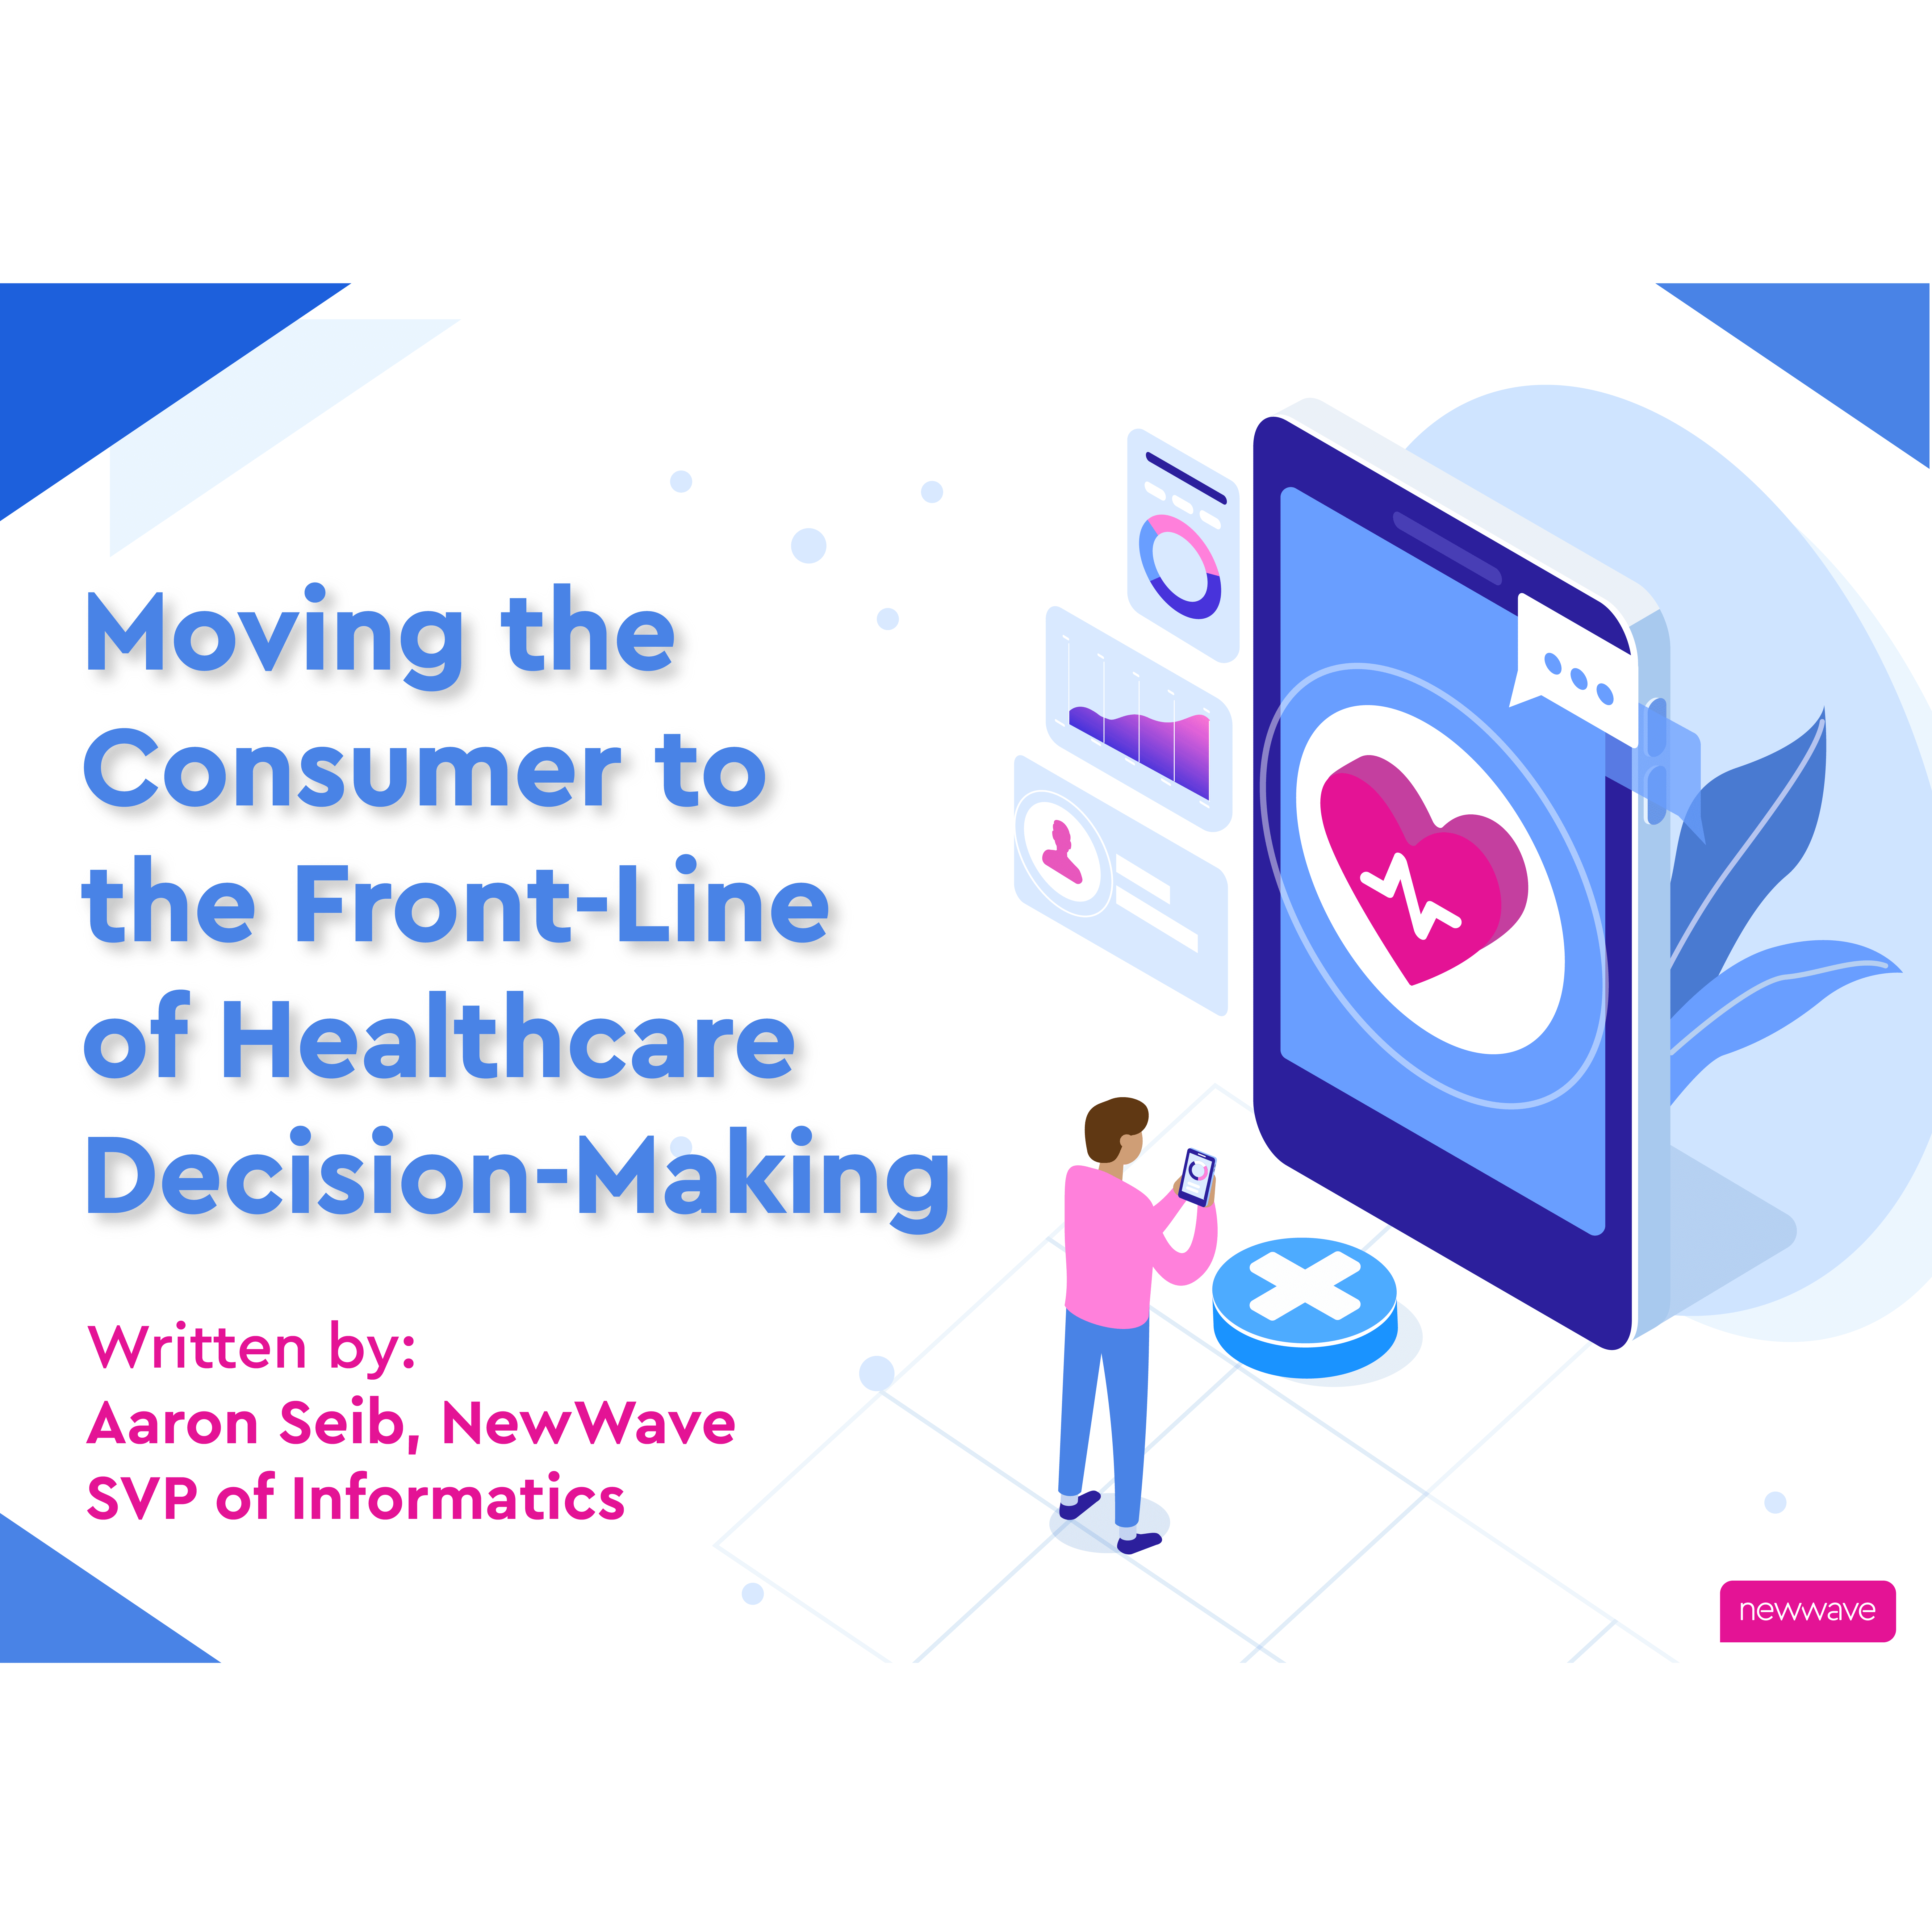 Moving the Consumer to the Front-Line of Healthcare Decision-Making